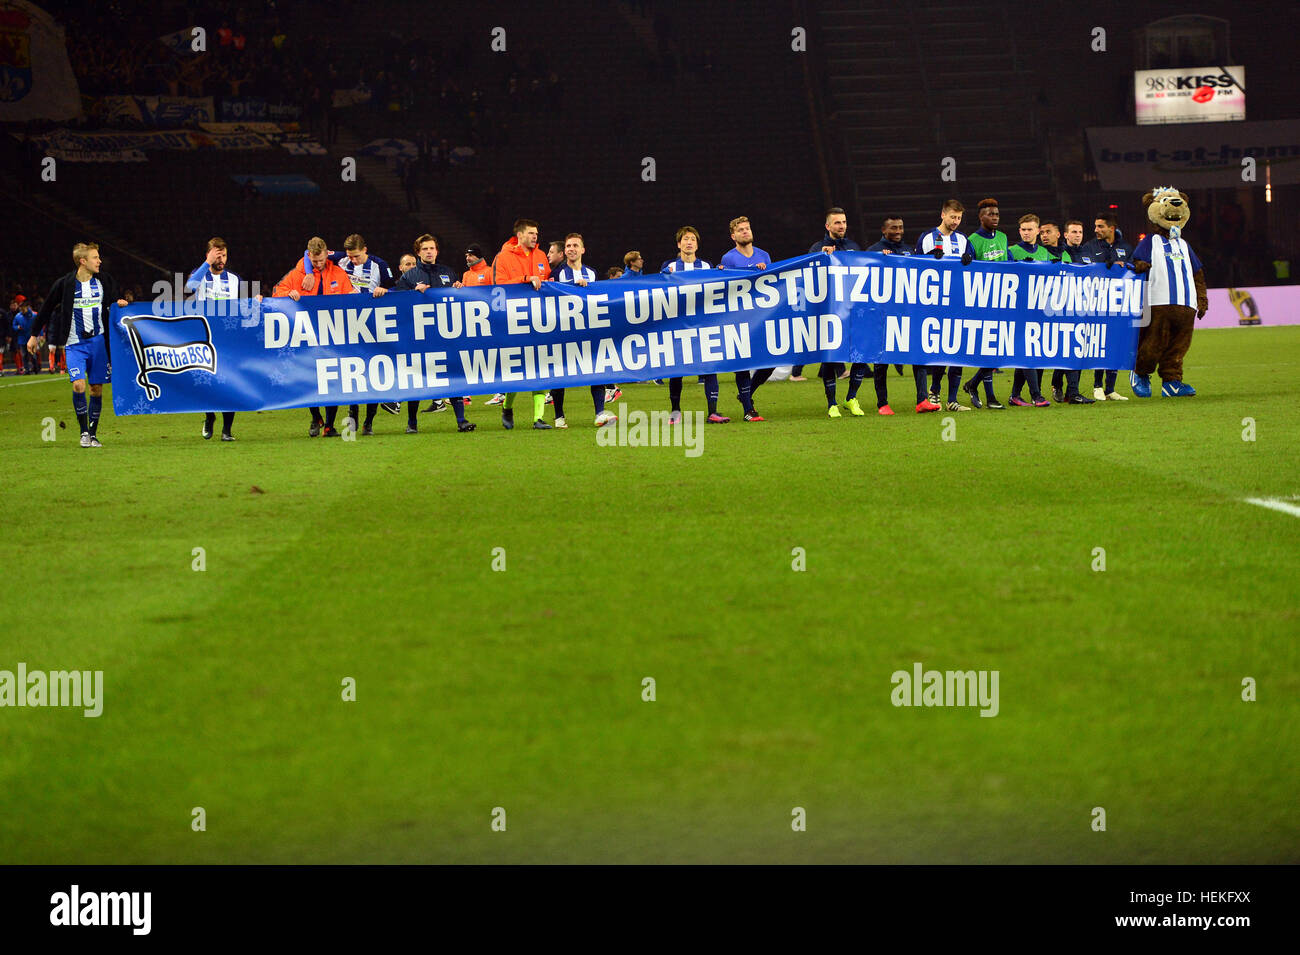 Berlin, Germany. 21st Dec, 2016. The team of Hertha BSC celebrates its 2-0 win while holding up a banner that reads 'Danke fuer Eure Unterstuetzung! Wir wuenschen frohe Weihnachten und einen guten Rutsch!' (lit. Thanks for your support! We wish you a merry Christmas and a happy new year!) after the German Bundesliga soccer match between Hertha BSC and Darmstadt 98 in the Olympic Stadium in Berlin, Germany, 21 December 2016. Photo: Maurizio Gambarini/dpa/Alamy Live News Stock Photo